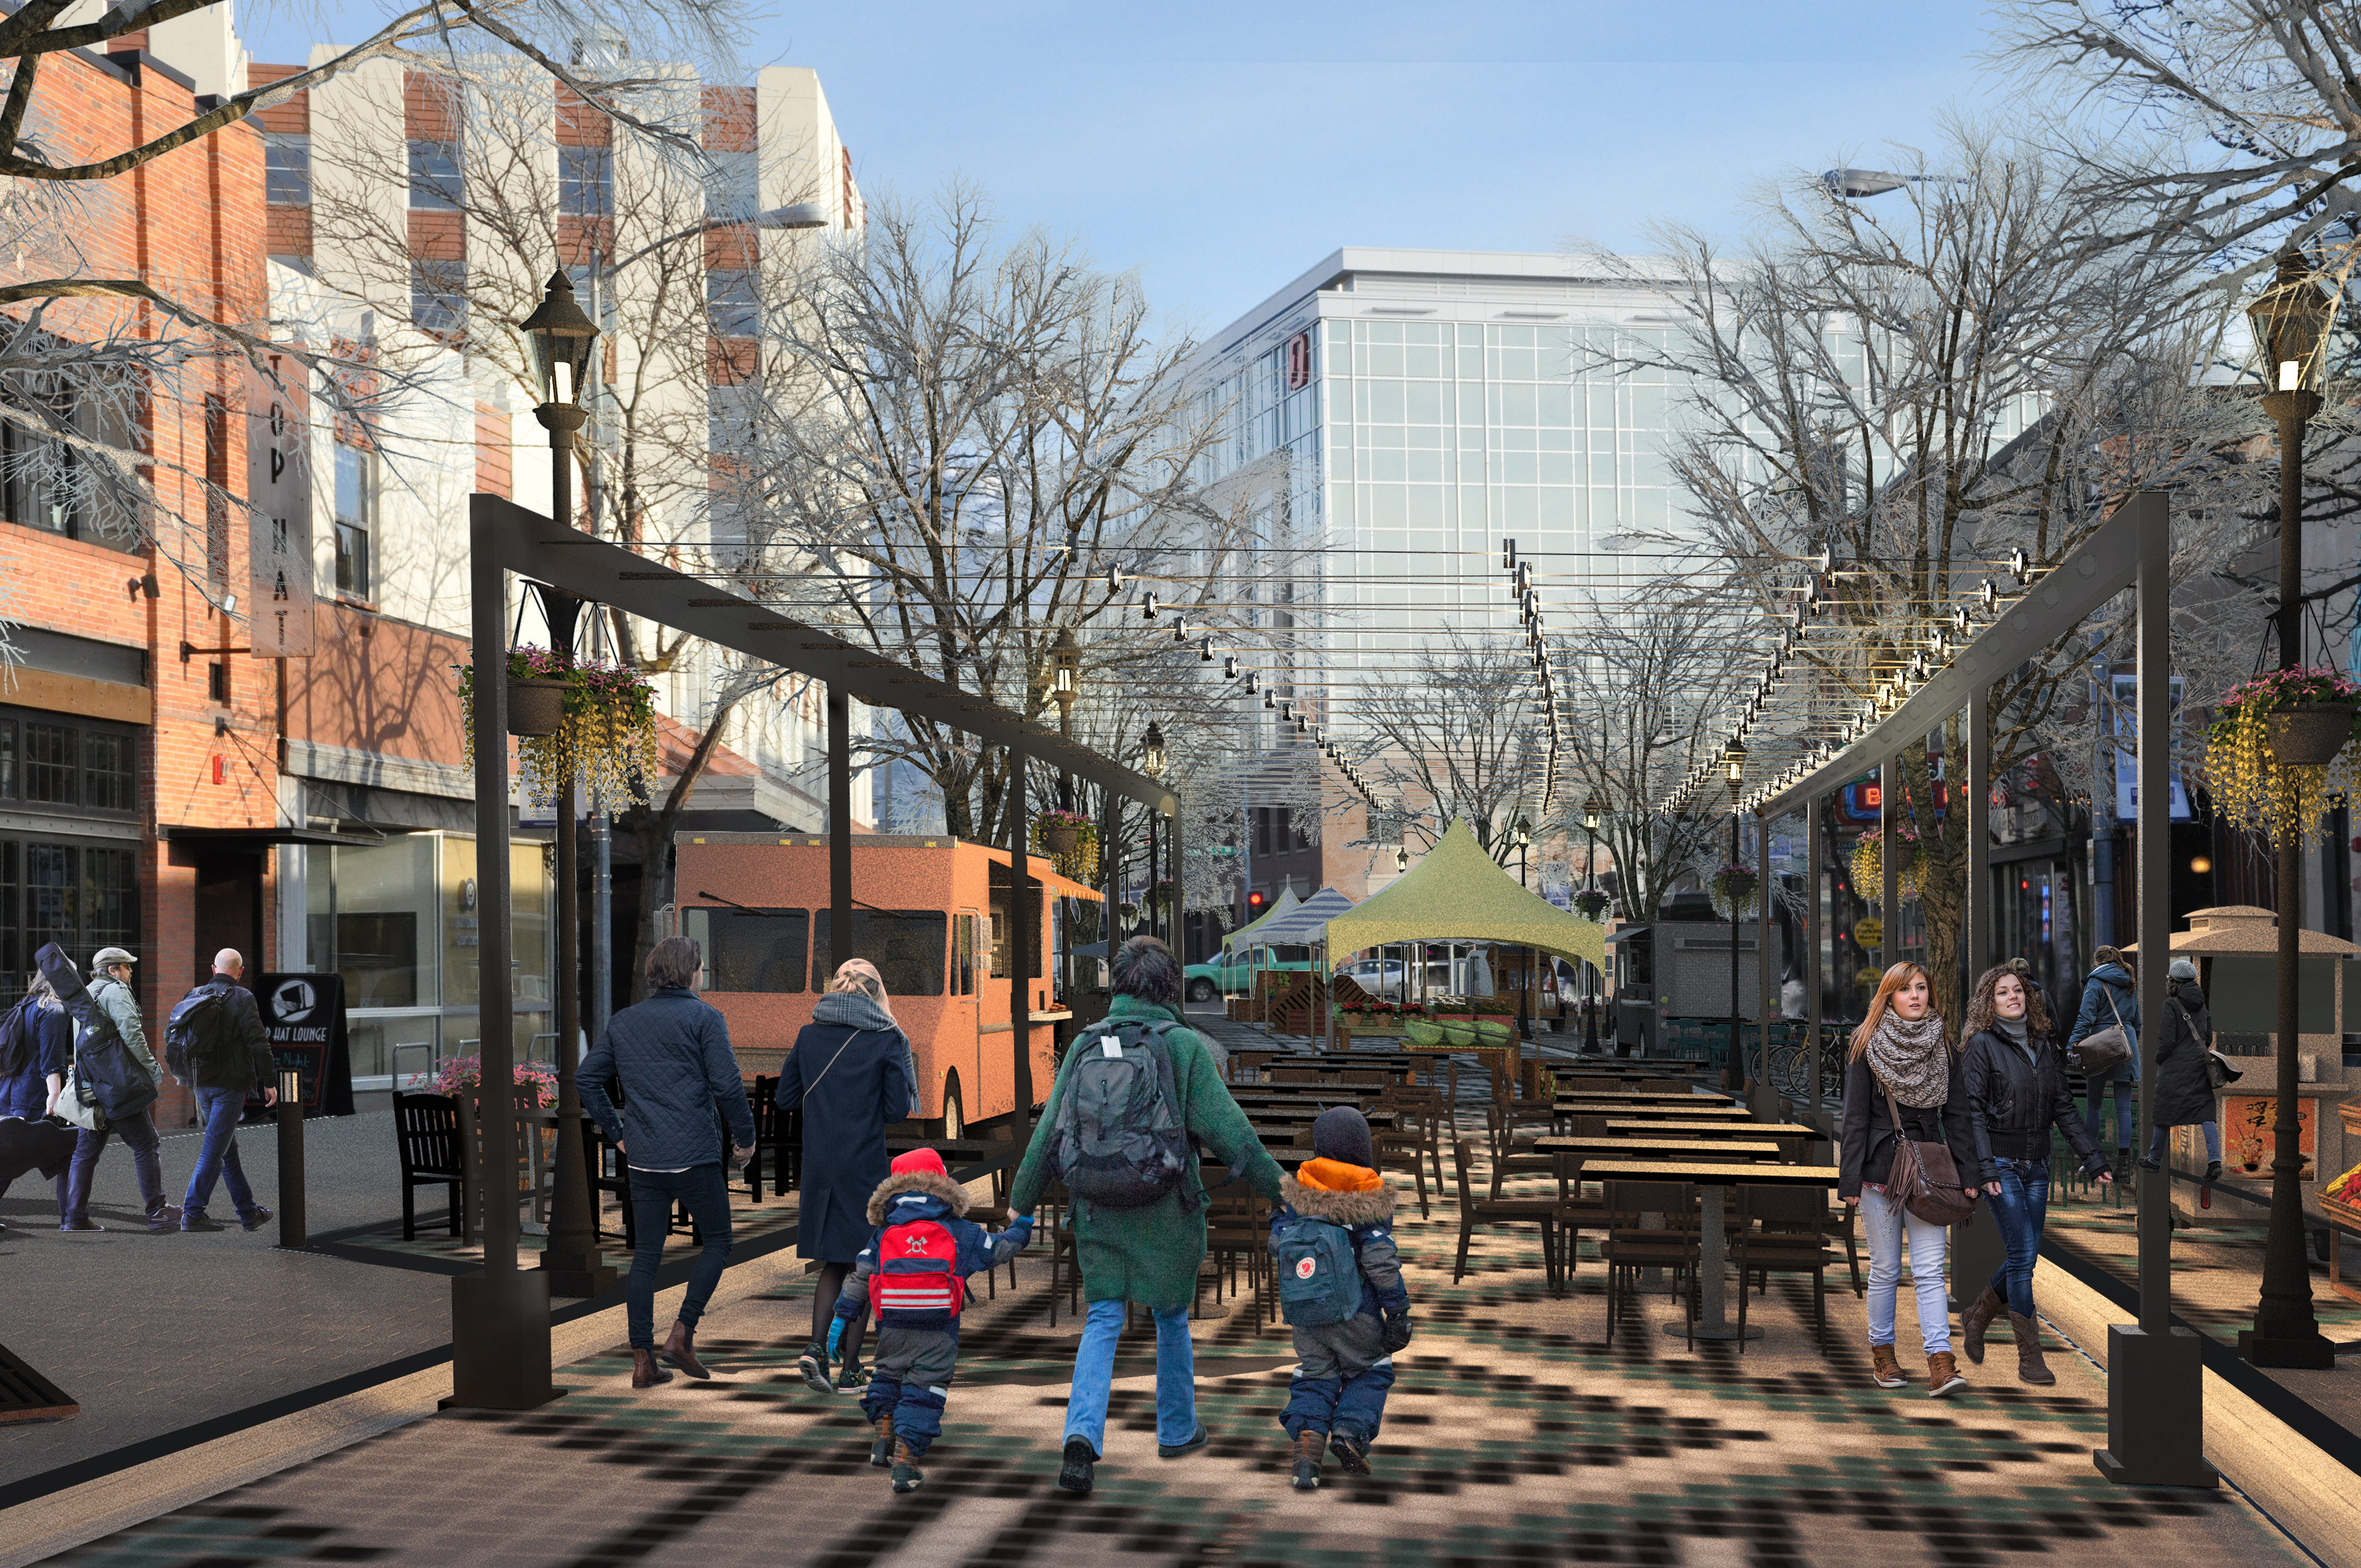 Introducing a Shared Street Concept